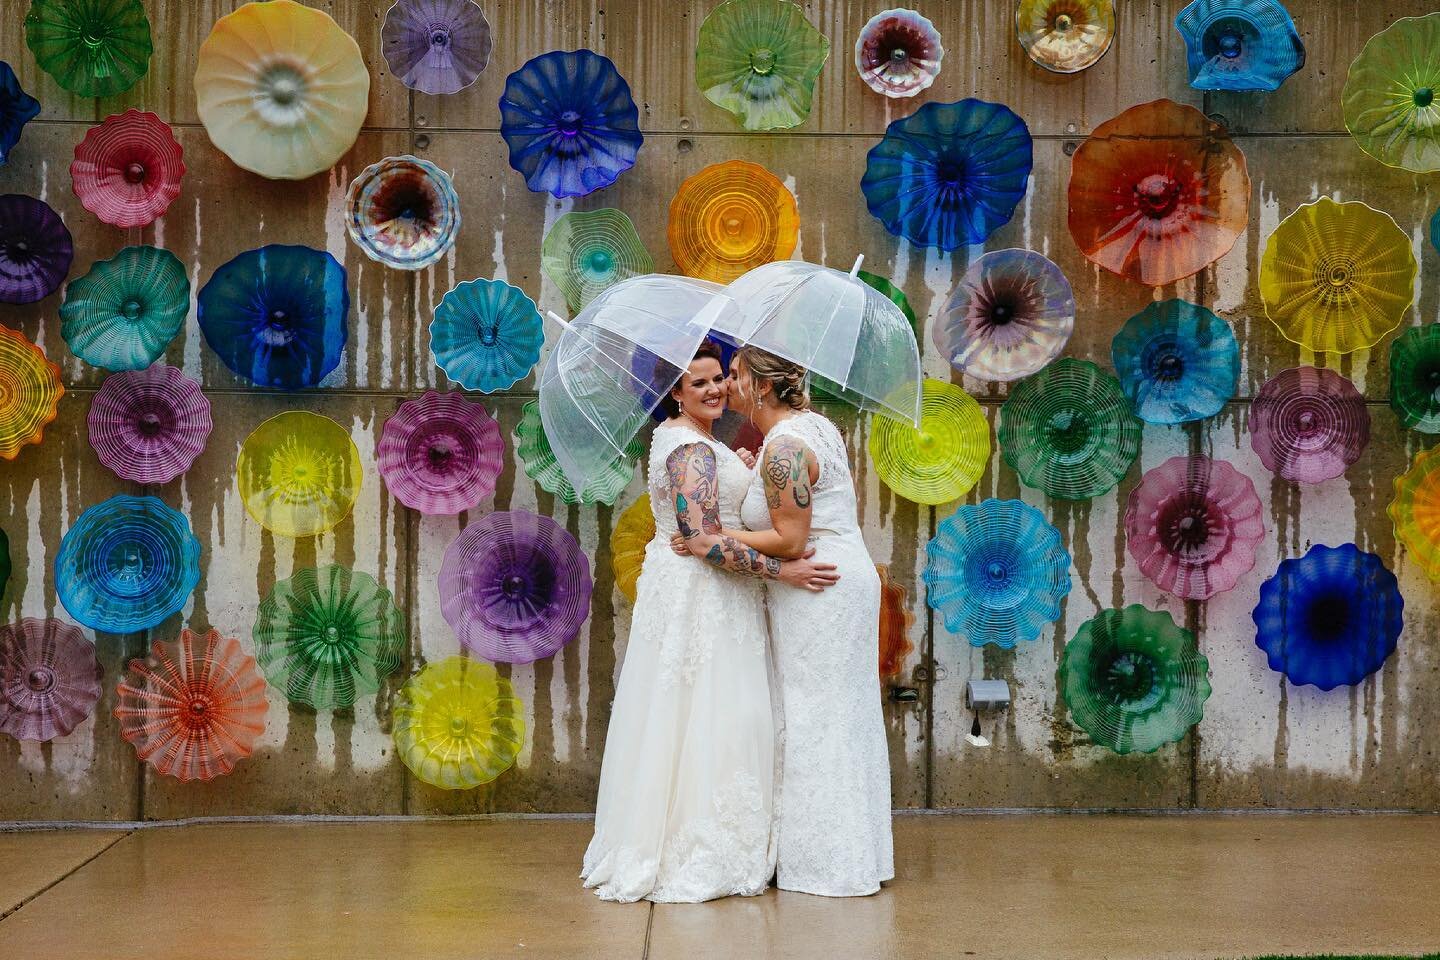 🌧🌈Rain or shine, we celebrate love!

Engaged and wanting to plan an intimate, unique wedding ceremony celebration? **We have limited dates available for the rest of this year so visit our website now to start planning your Neighborhood Nuptials!!

